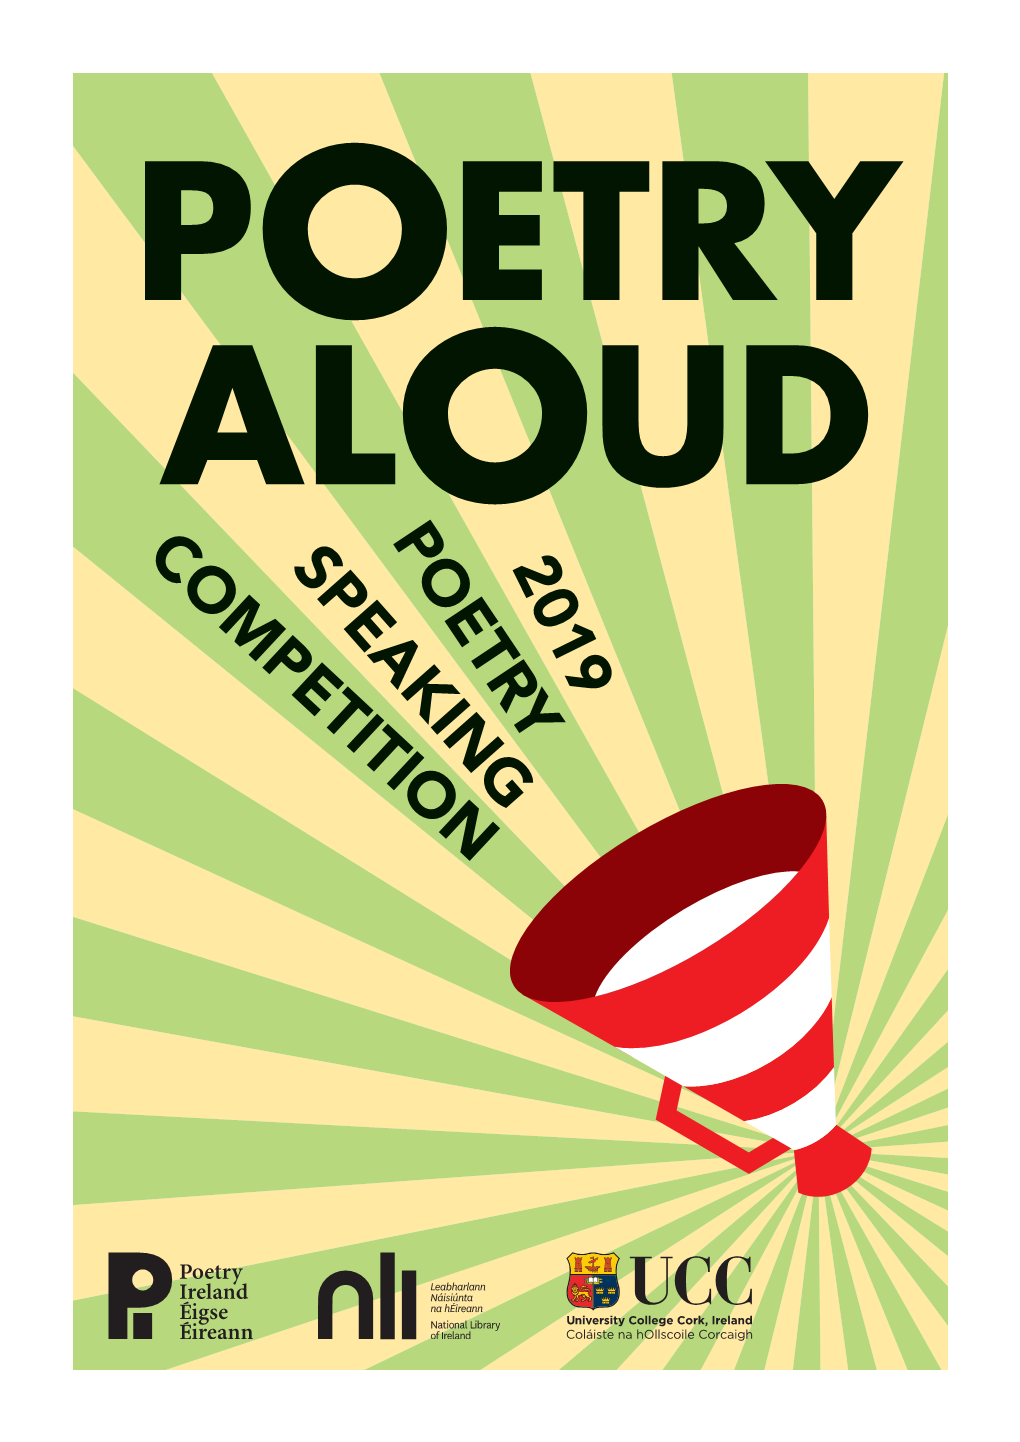 WHAT IS POETRY ALOUD? Poetry Aloud Is an Annual Poetry Speaking Competition Open to All Post-Primary Students on the Island of Ireland